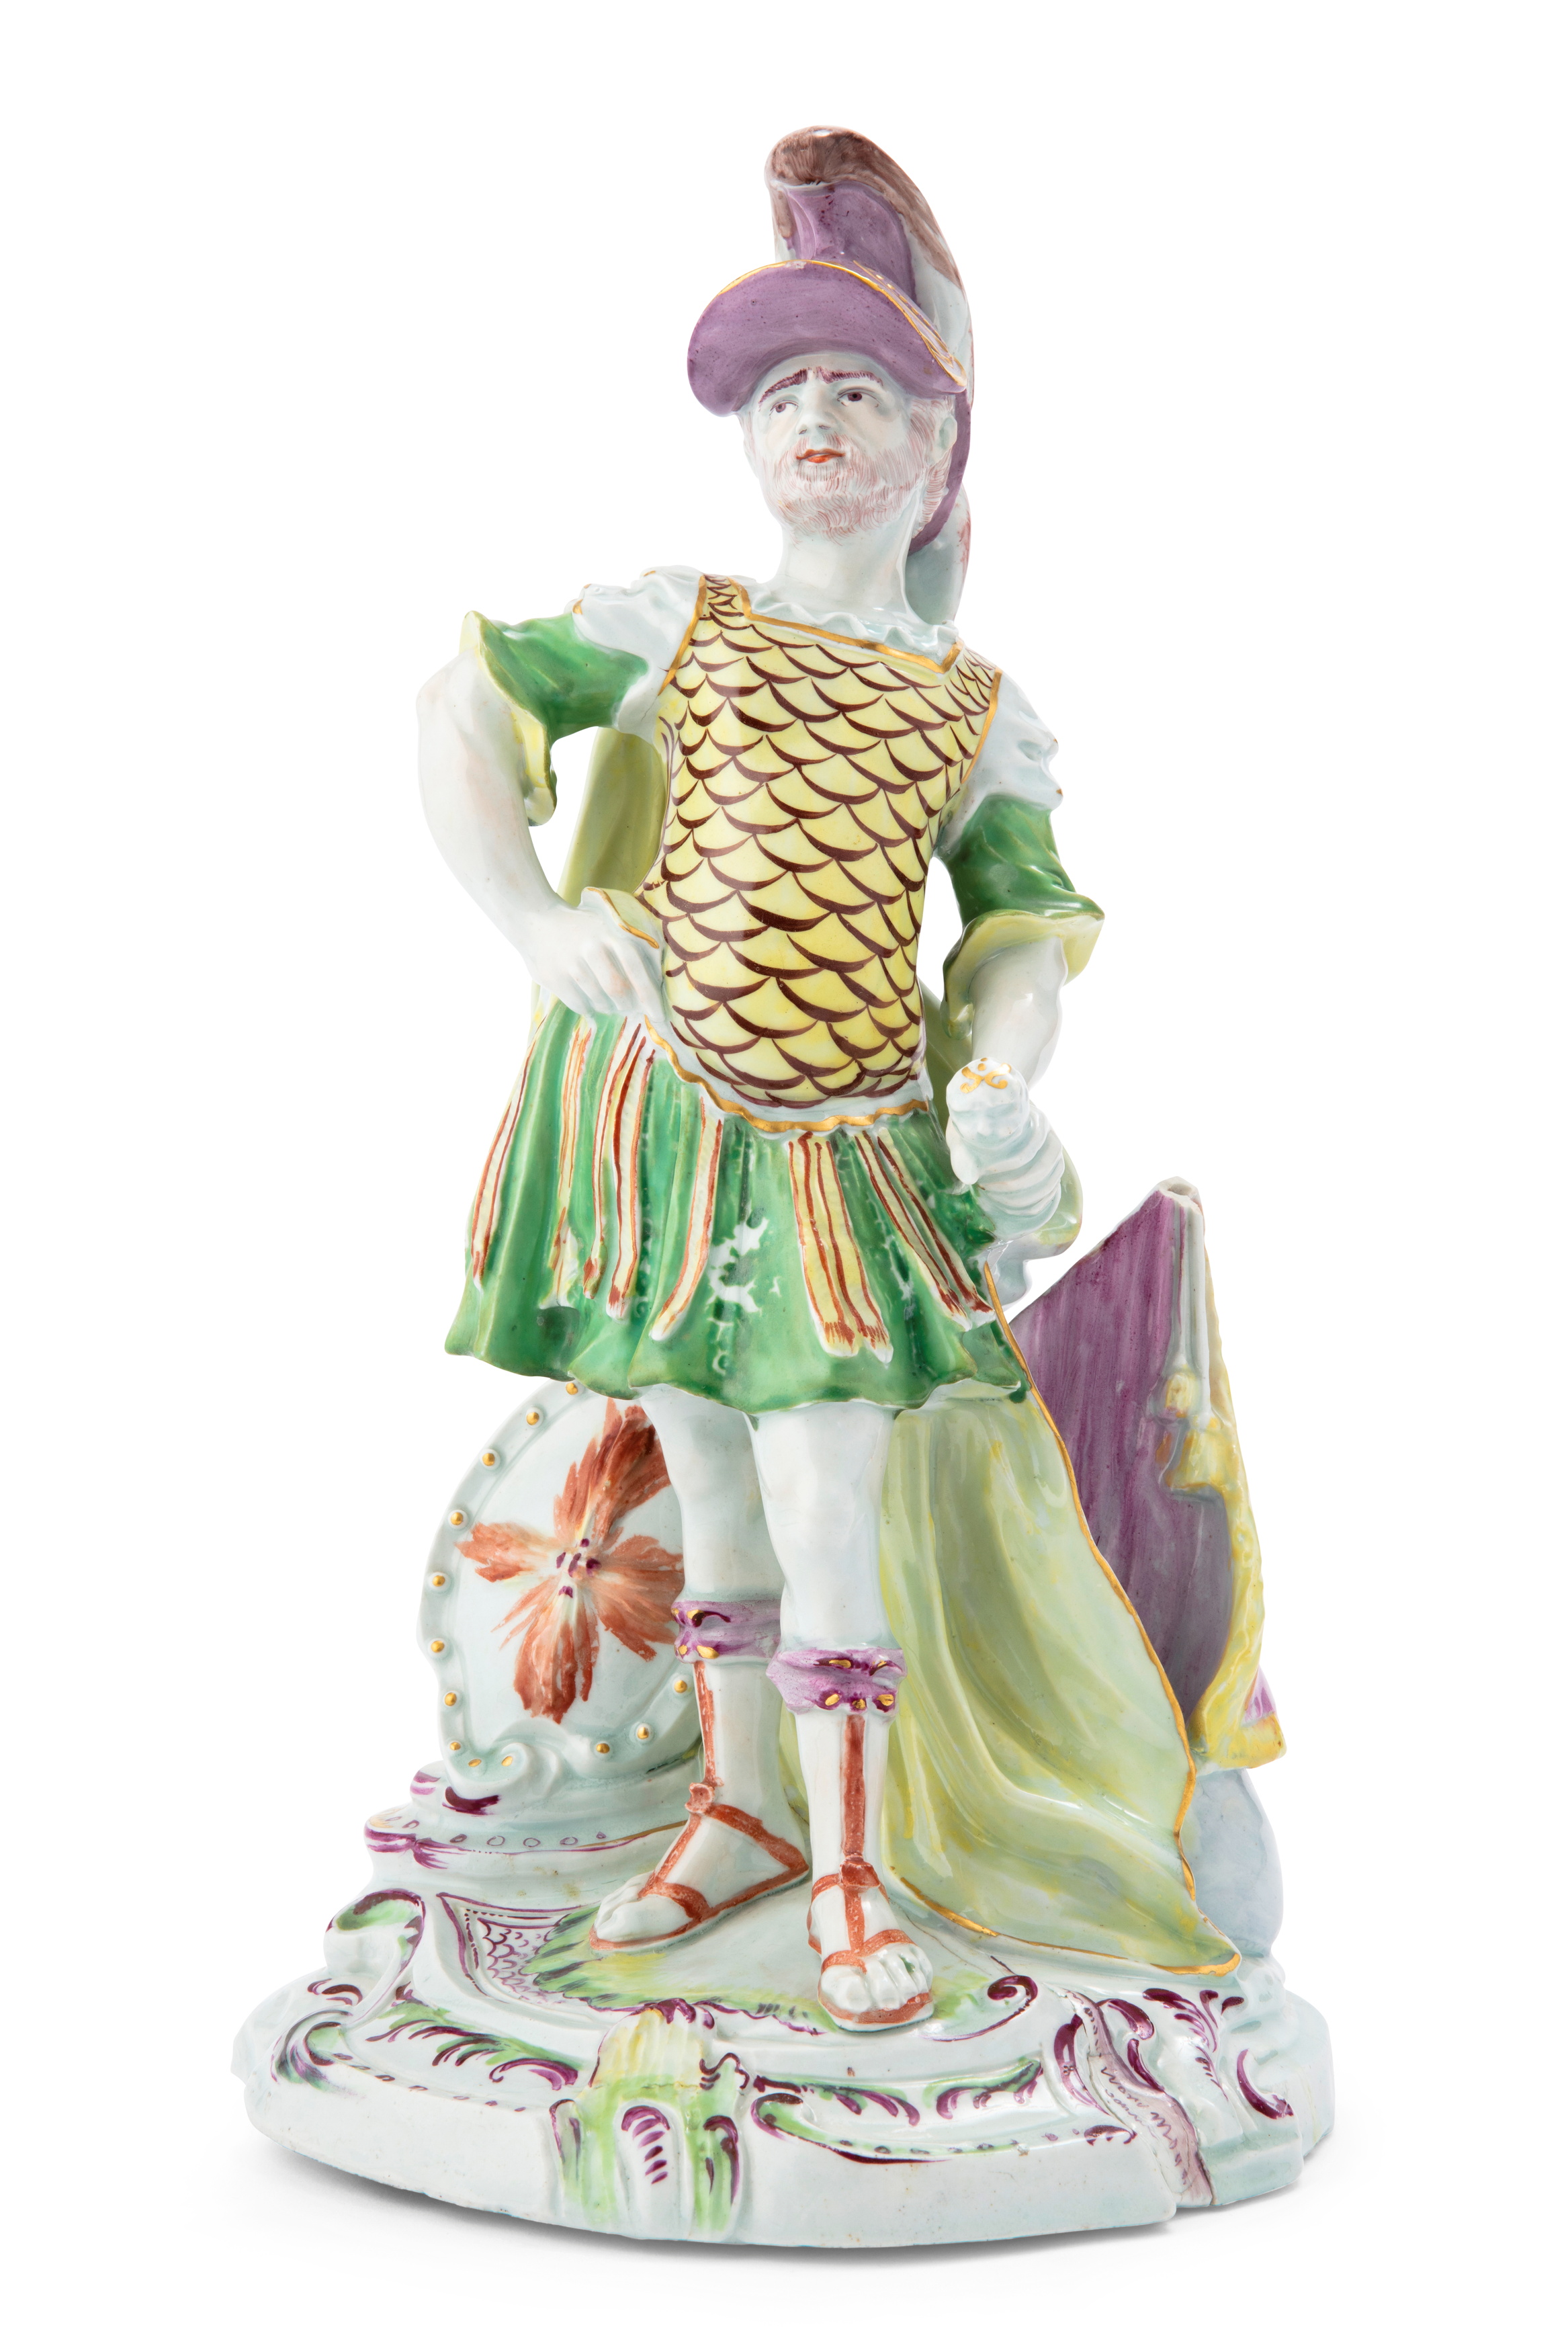 'Mars' porcelain figure made by William Duesbury & Co